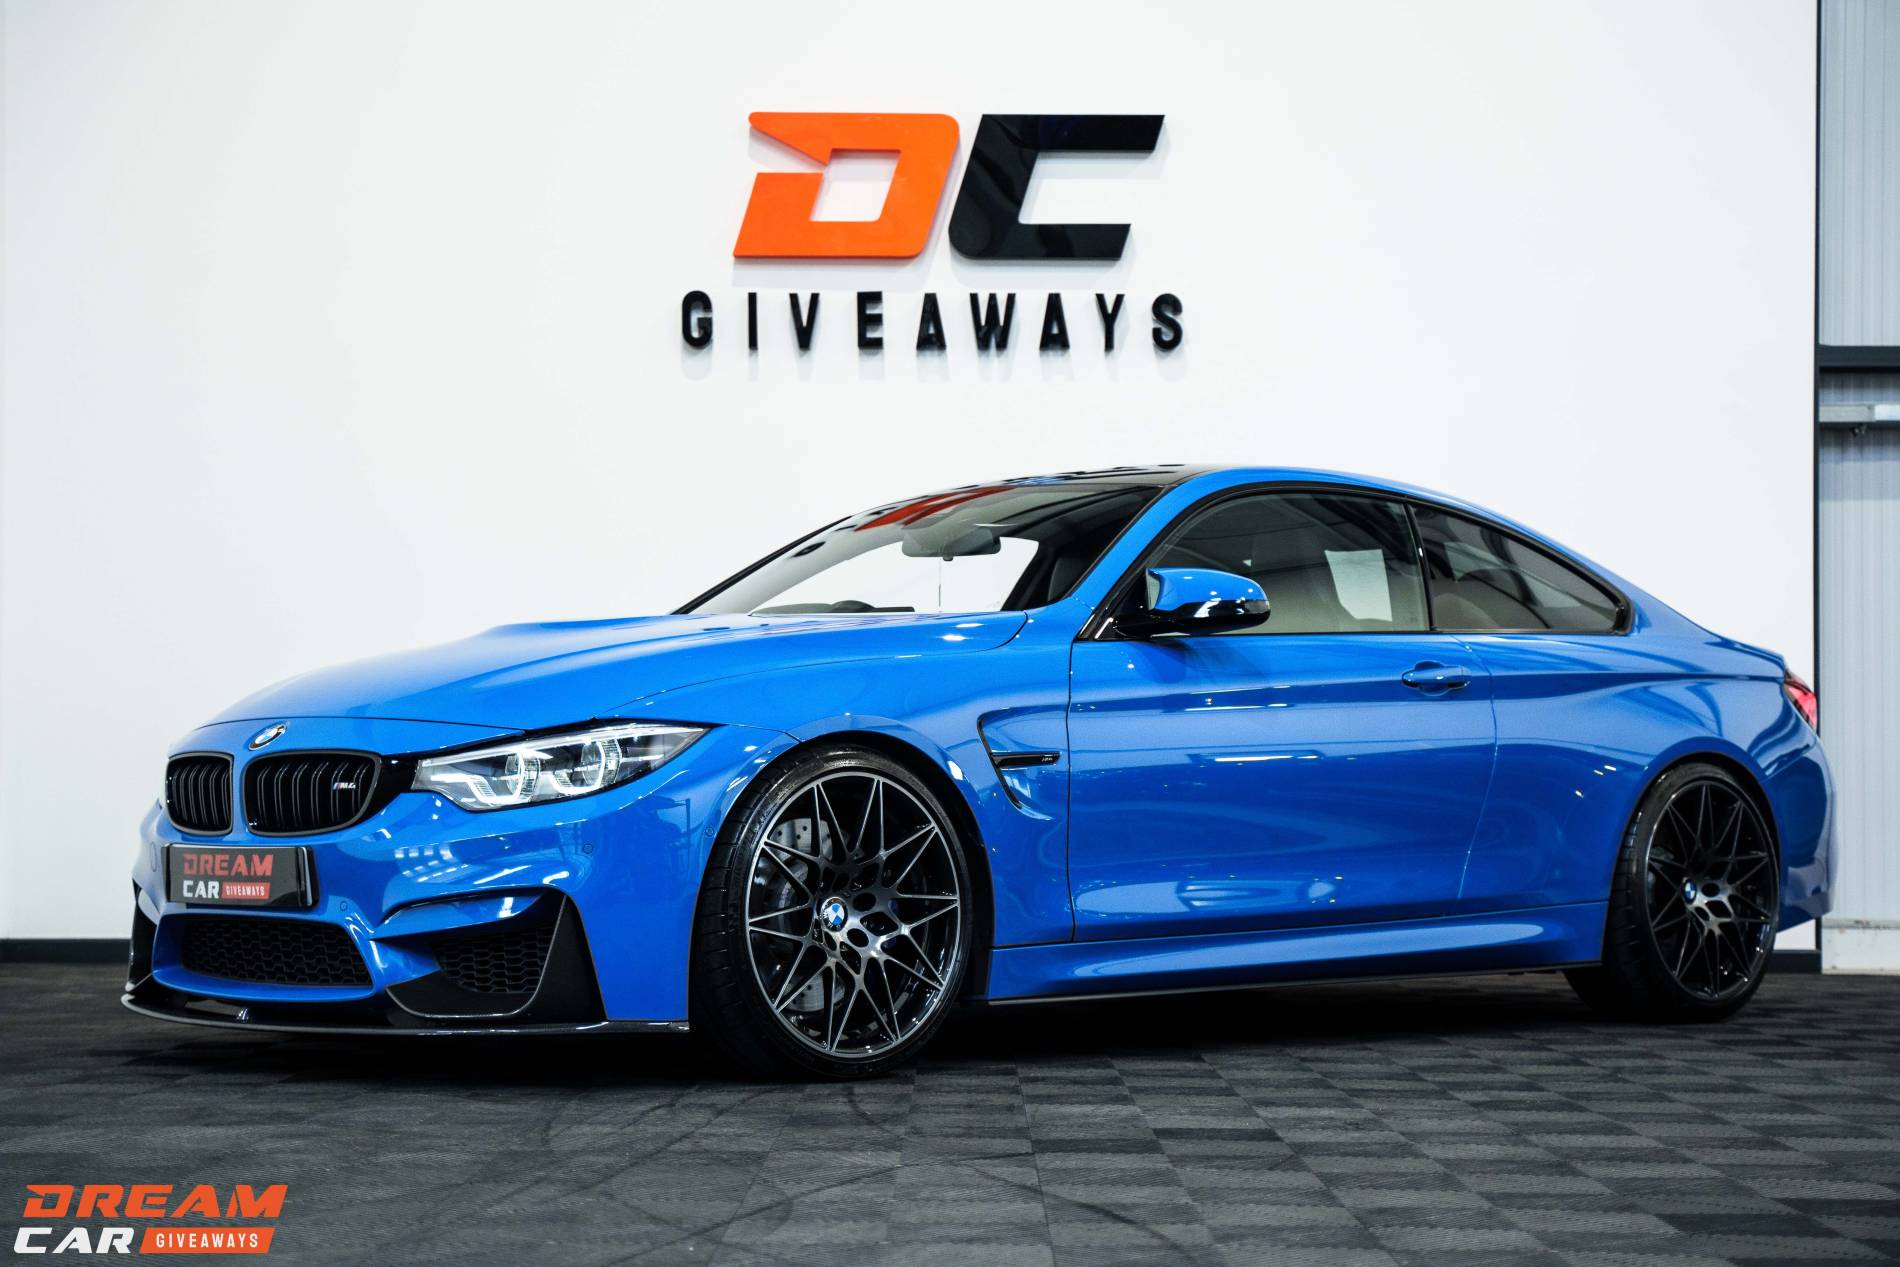 Win this 2020 BMW M4 Competition & £1,000 or £35,000 Tax Free